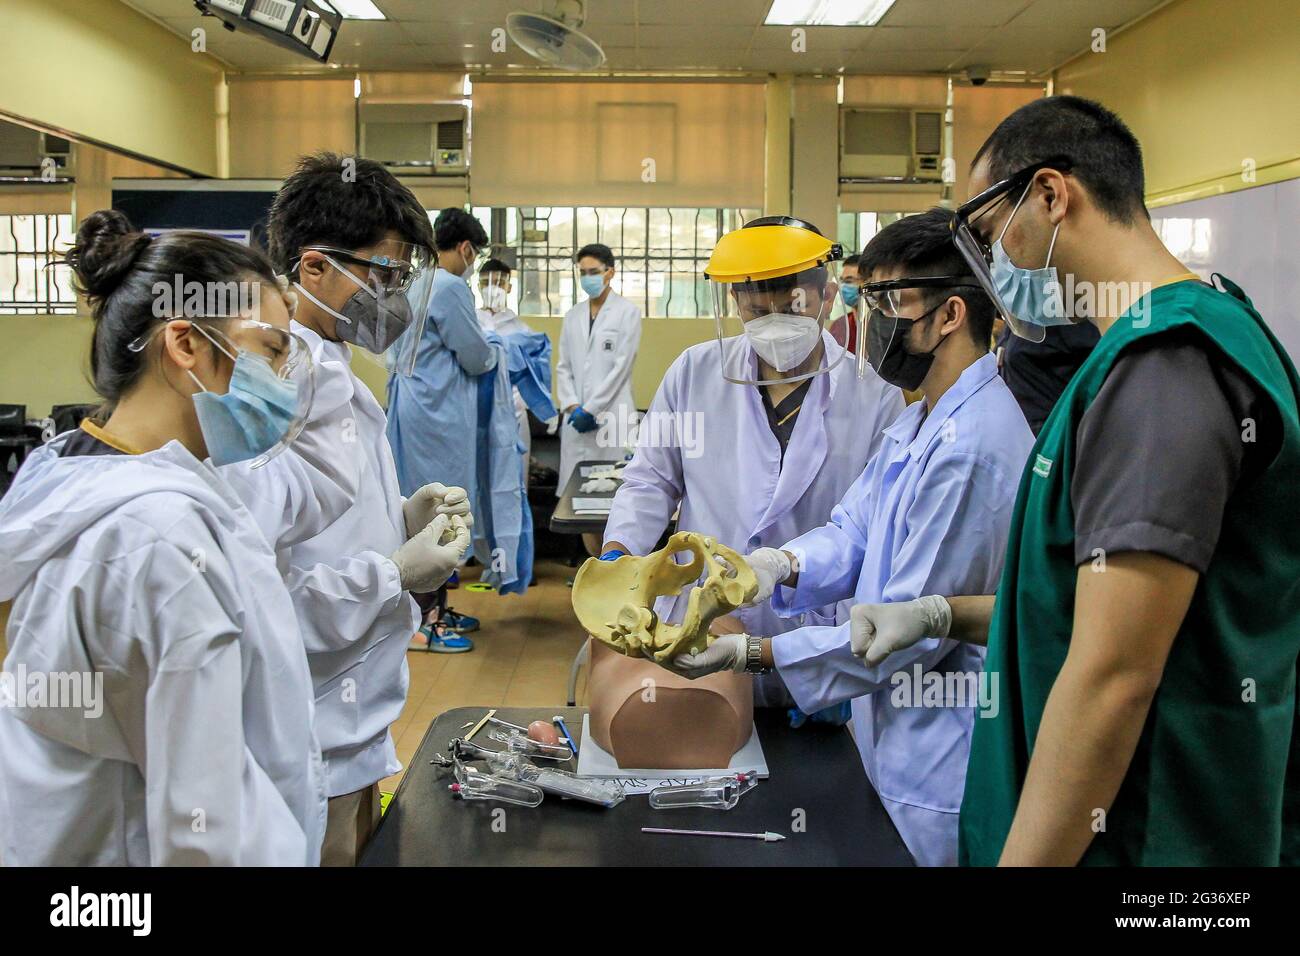 Manila, Philippines. 14th June, 2021. Medical students attend a face-to-face class at the University of Santo Tomas in Manila, the Philippines, on June 14, 2021. Credit: Rouelle Umali/Xinhua/Alamy Live News Stock Photo